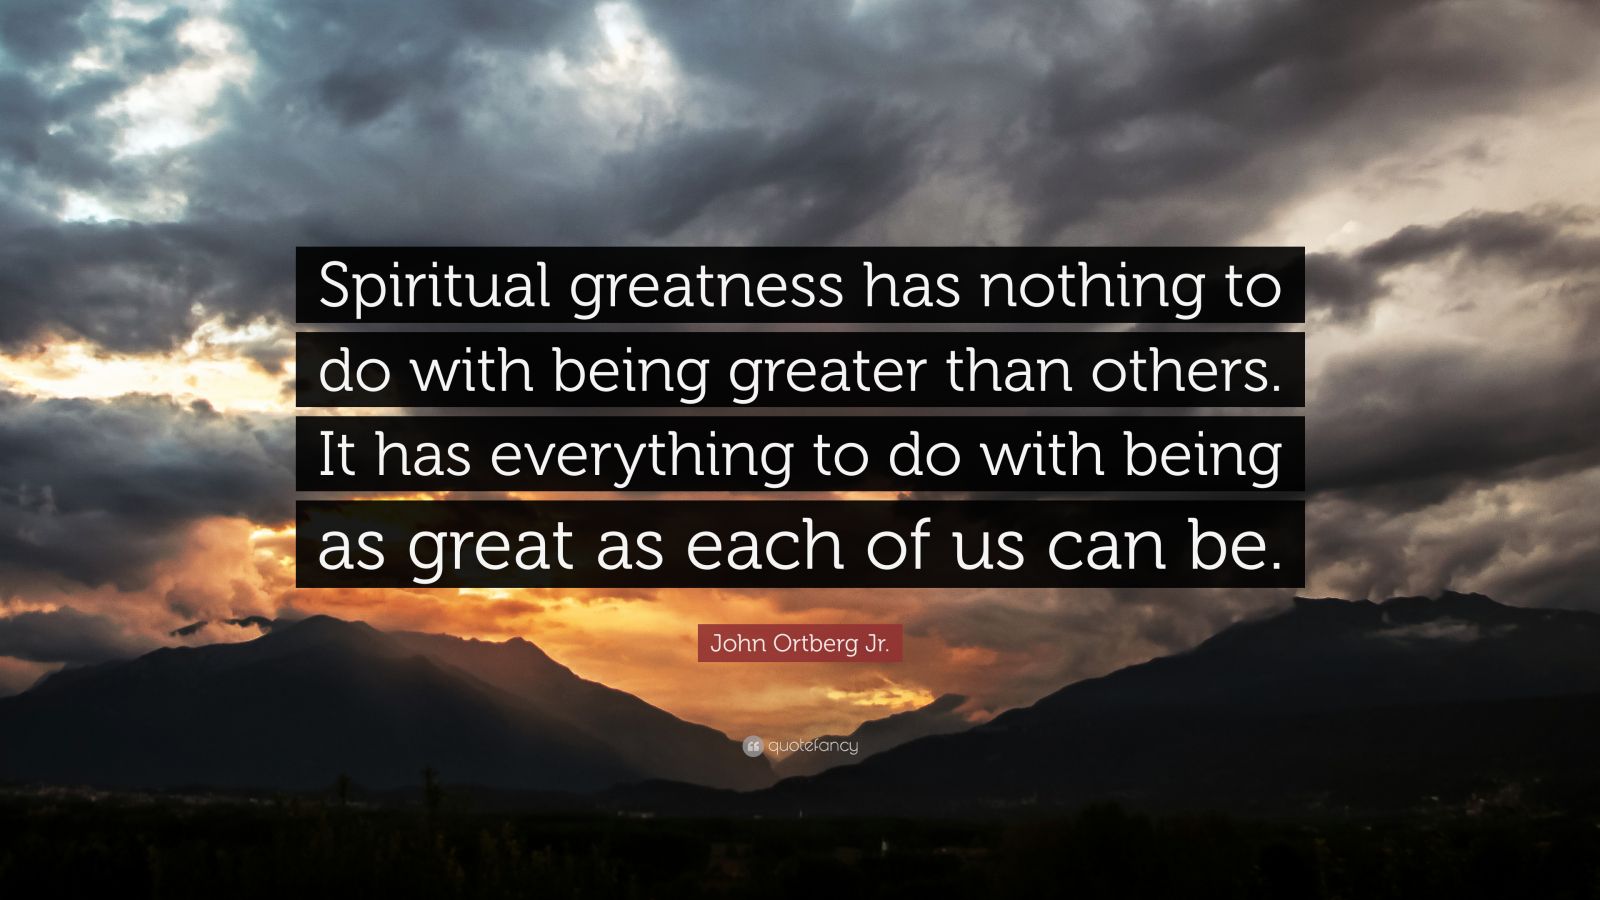 John Ortberg Jr. Quote: “Spiritual greatness has nothing to do with ...